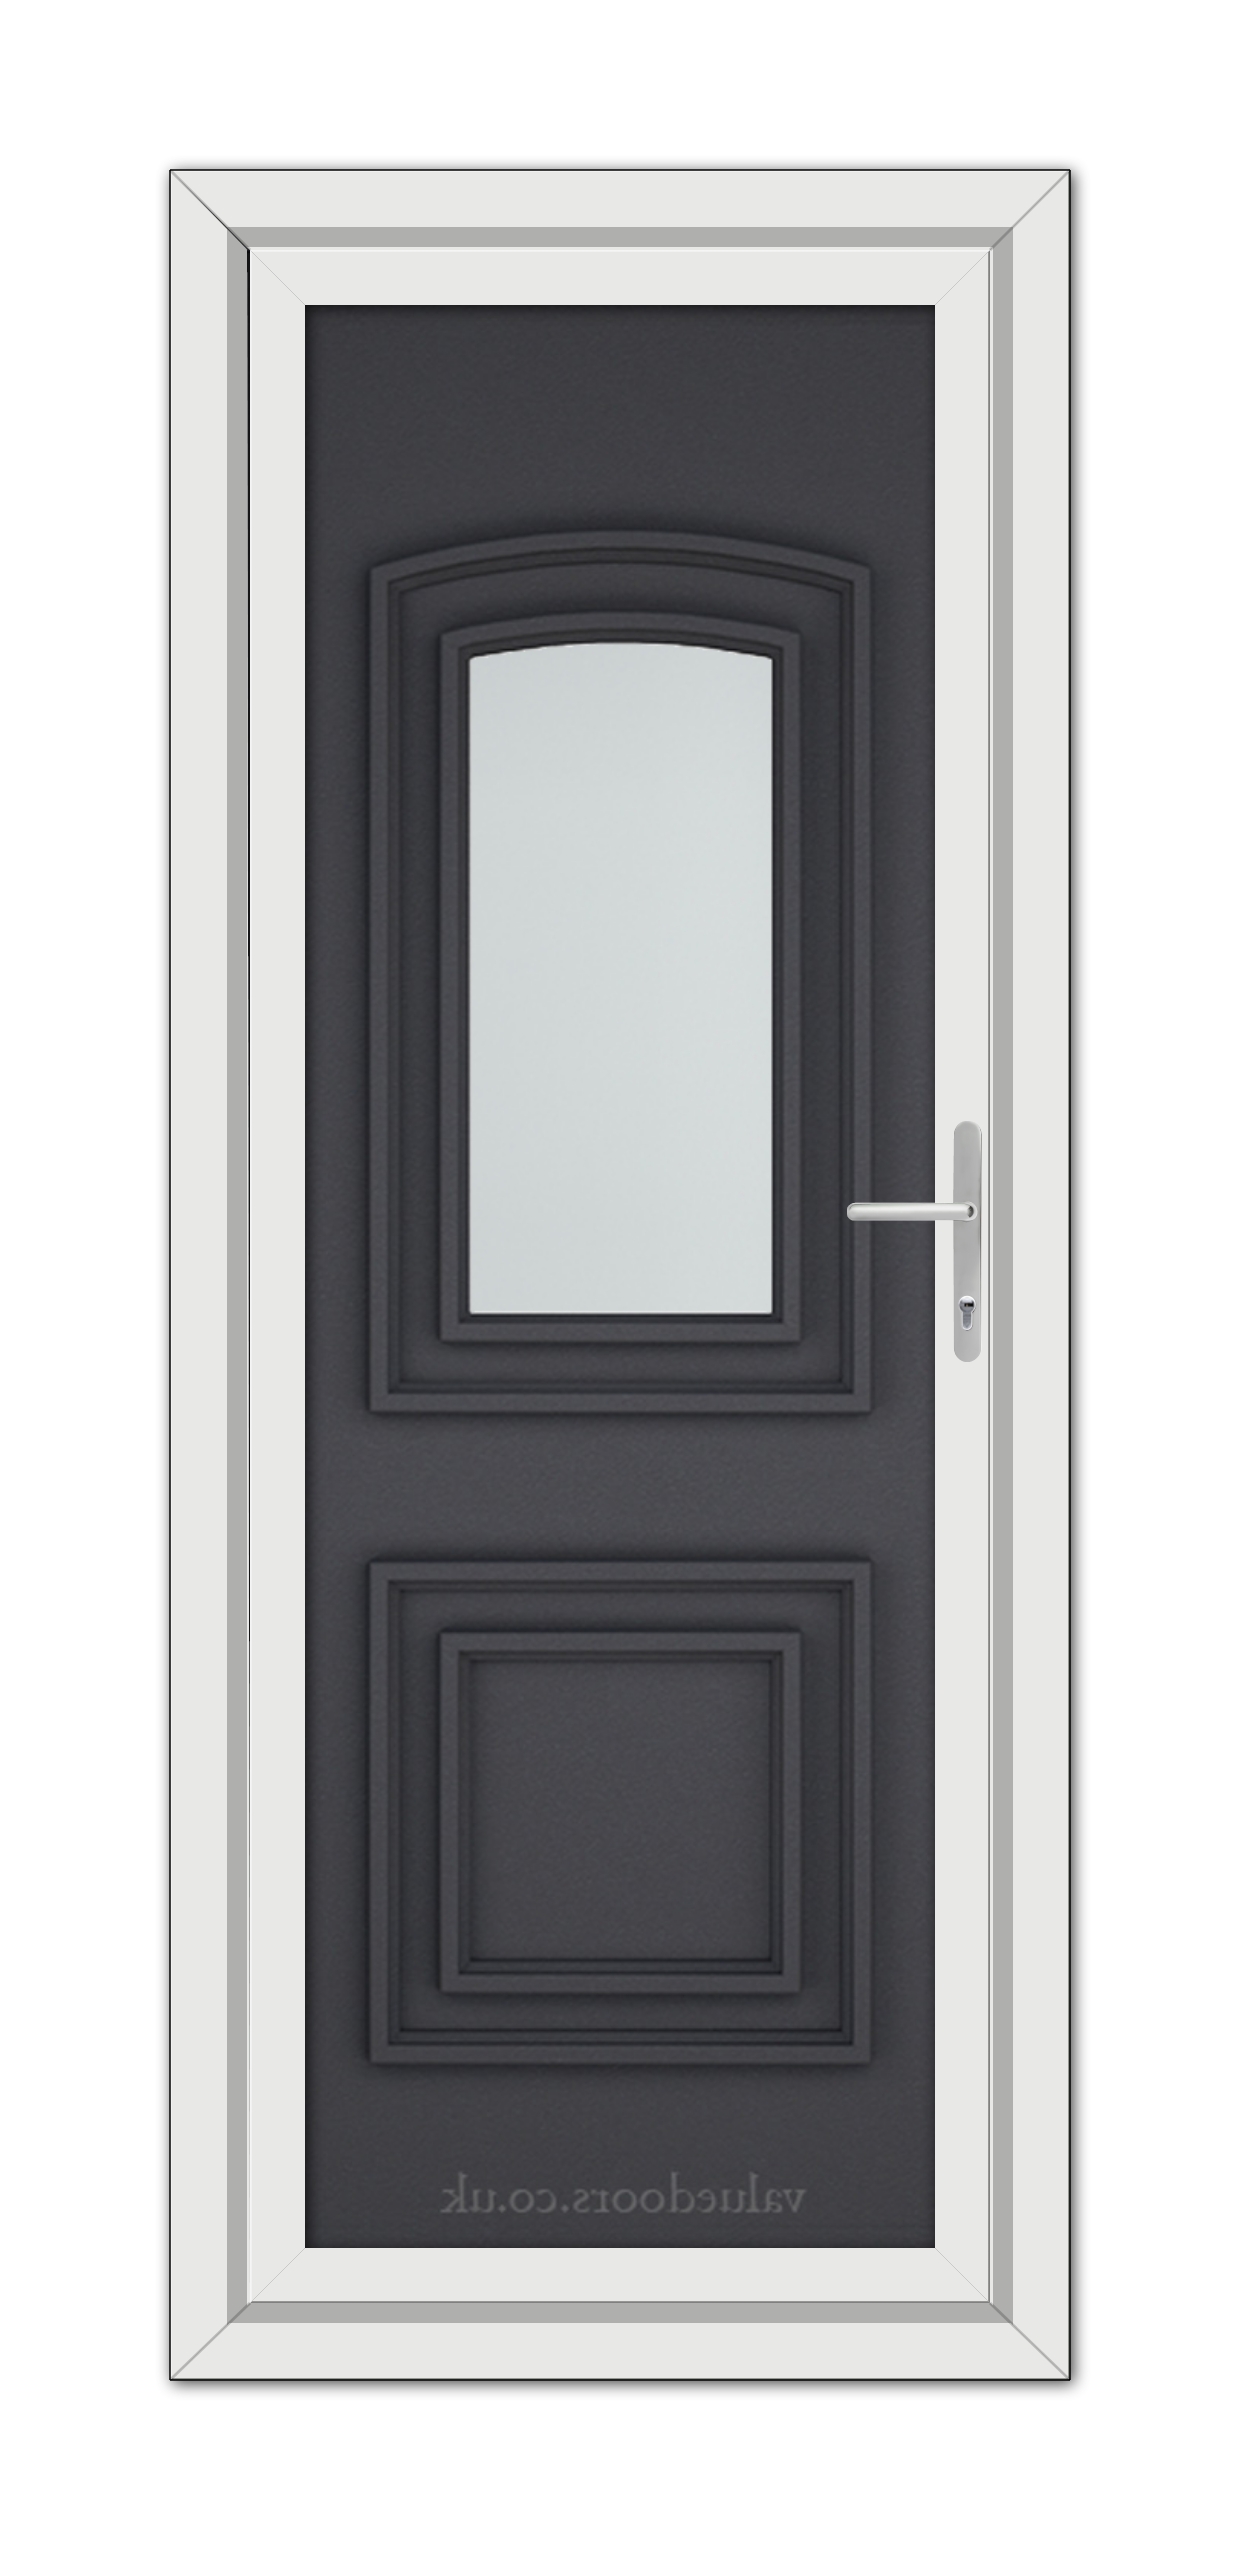 A modern, Grey Grained Balmoral One uPVC door with a narrow vertical glass panel and a silver handle, framed by a white doorframe.